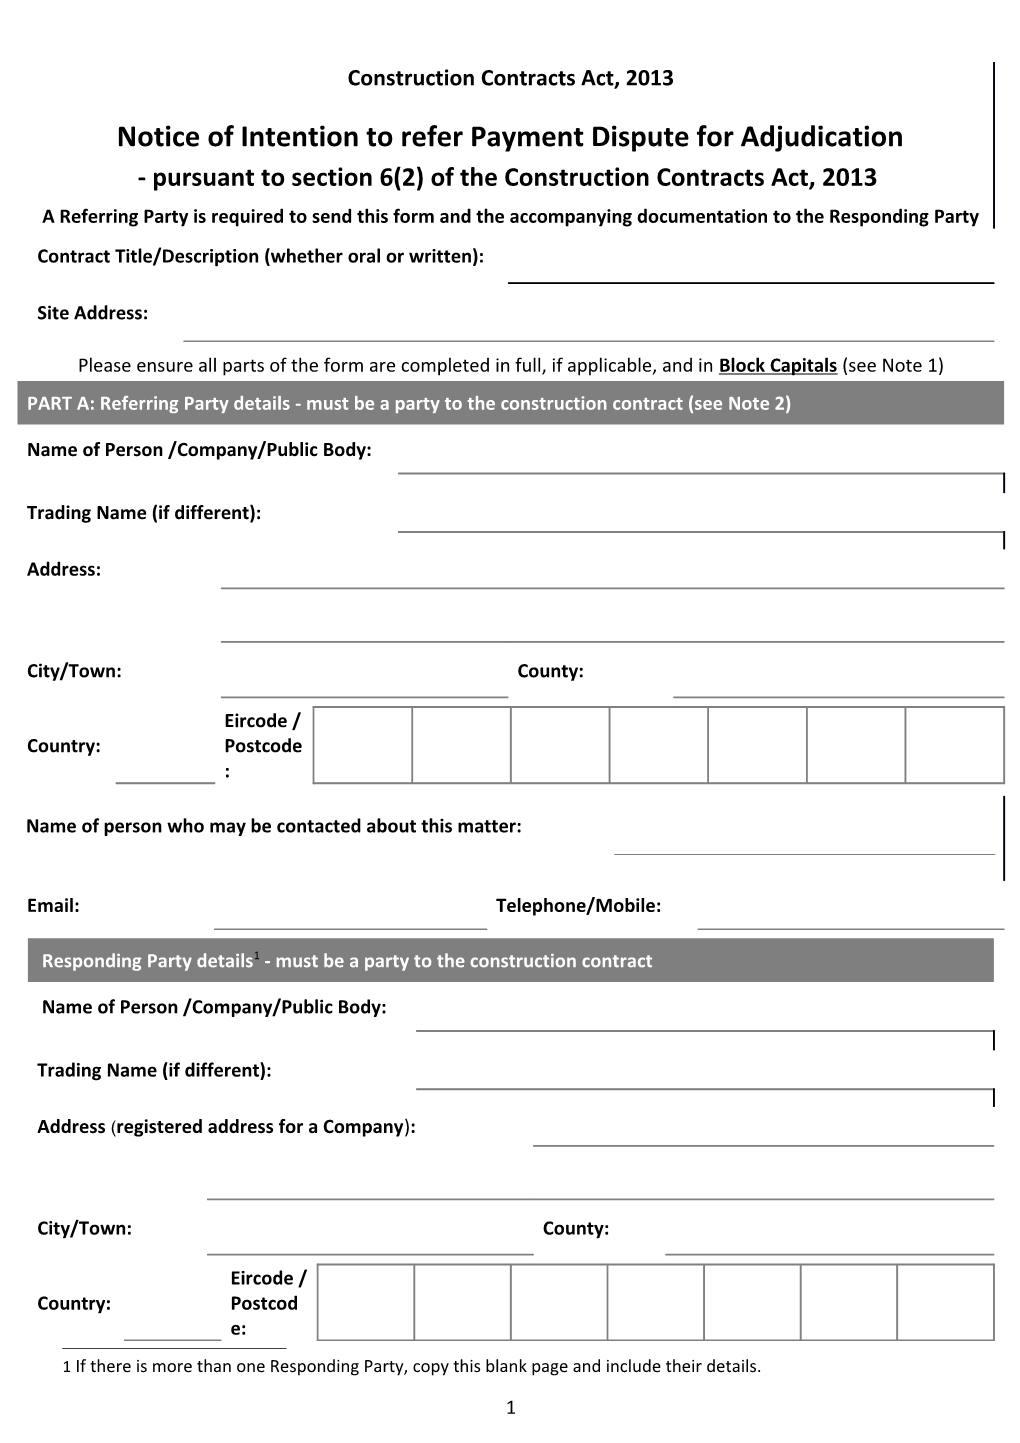 Please Ensure All Parts of the Form Are Completed in Full, If Applicable, and in Block